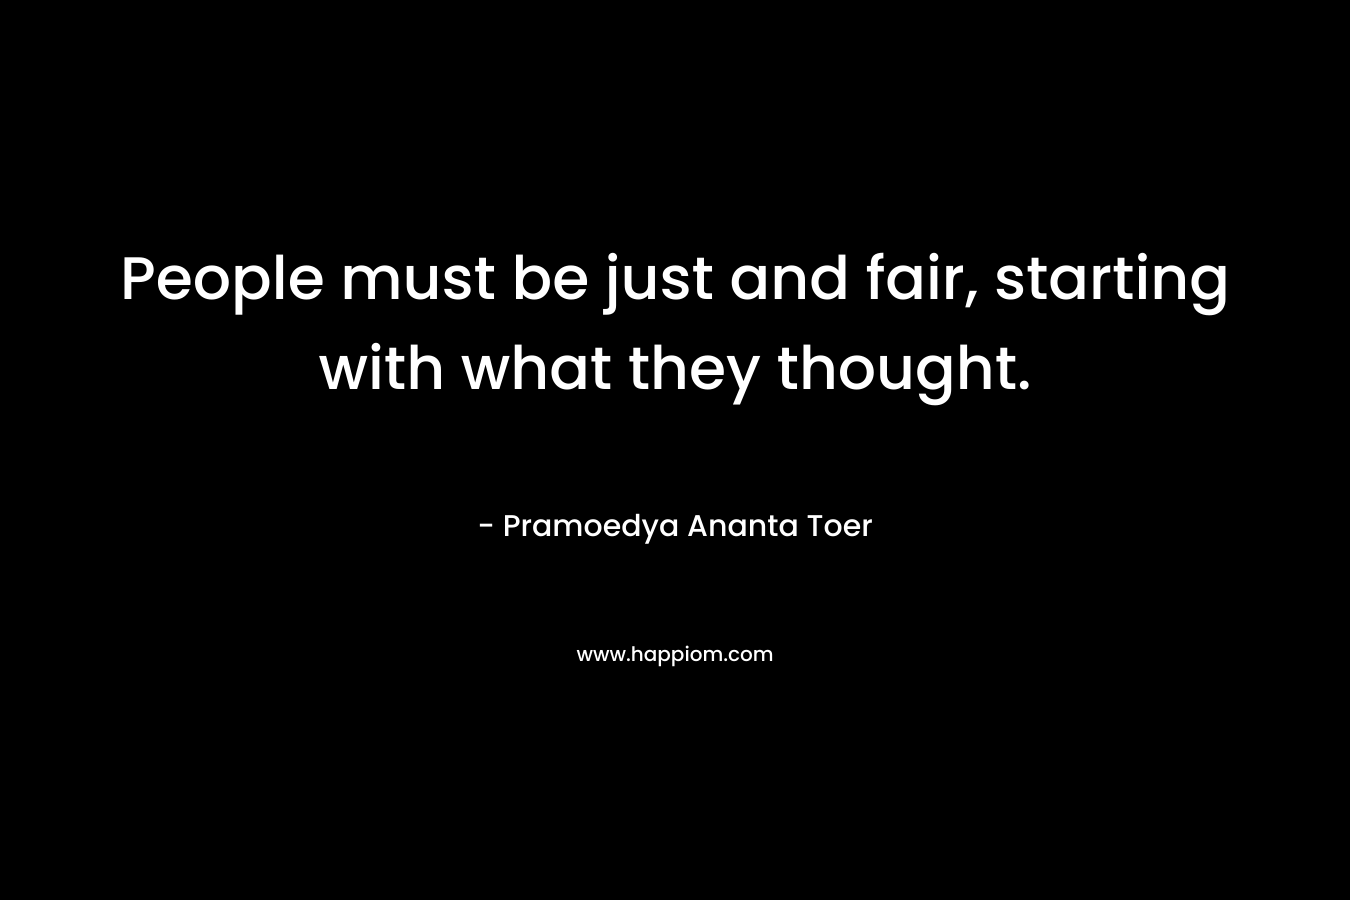 People must be just and fair, starting with what they thought. – Pramoedya Ananta Toer